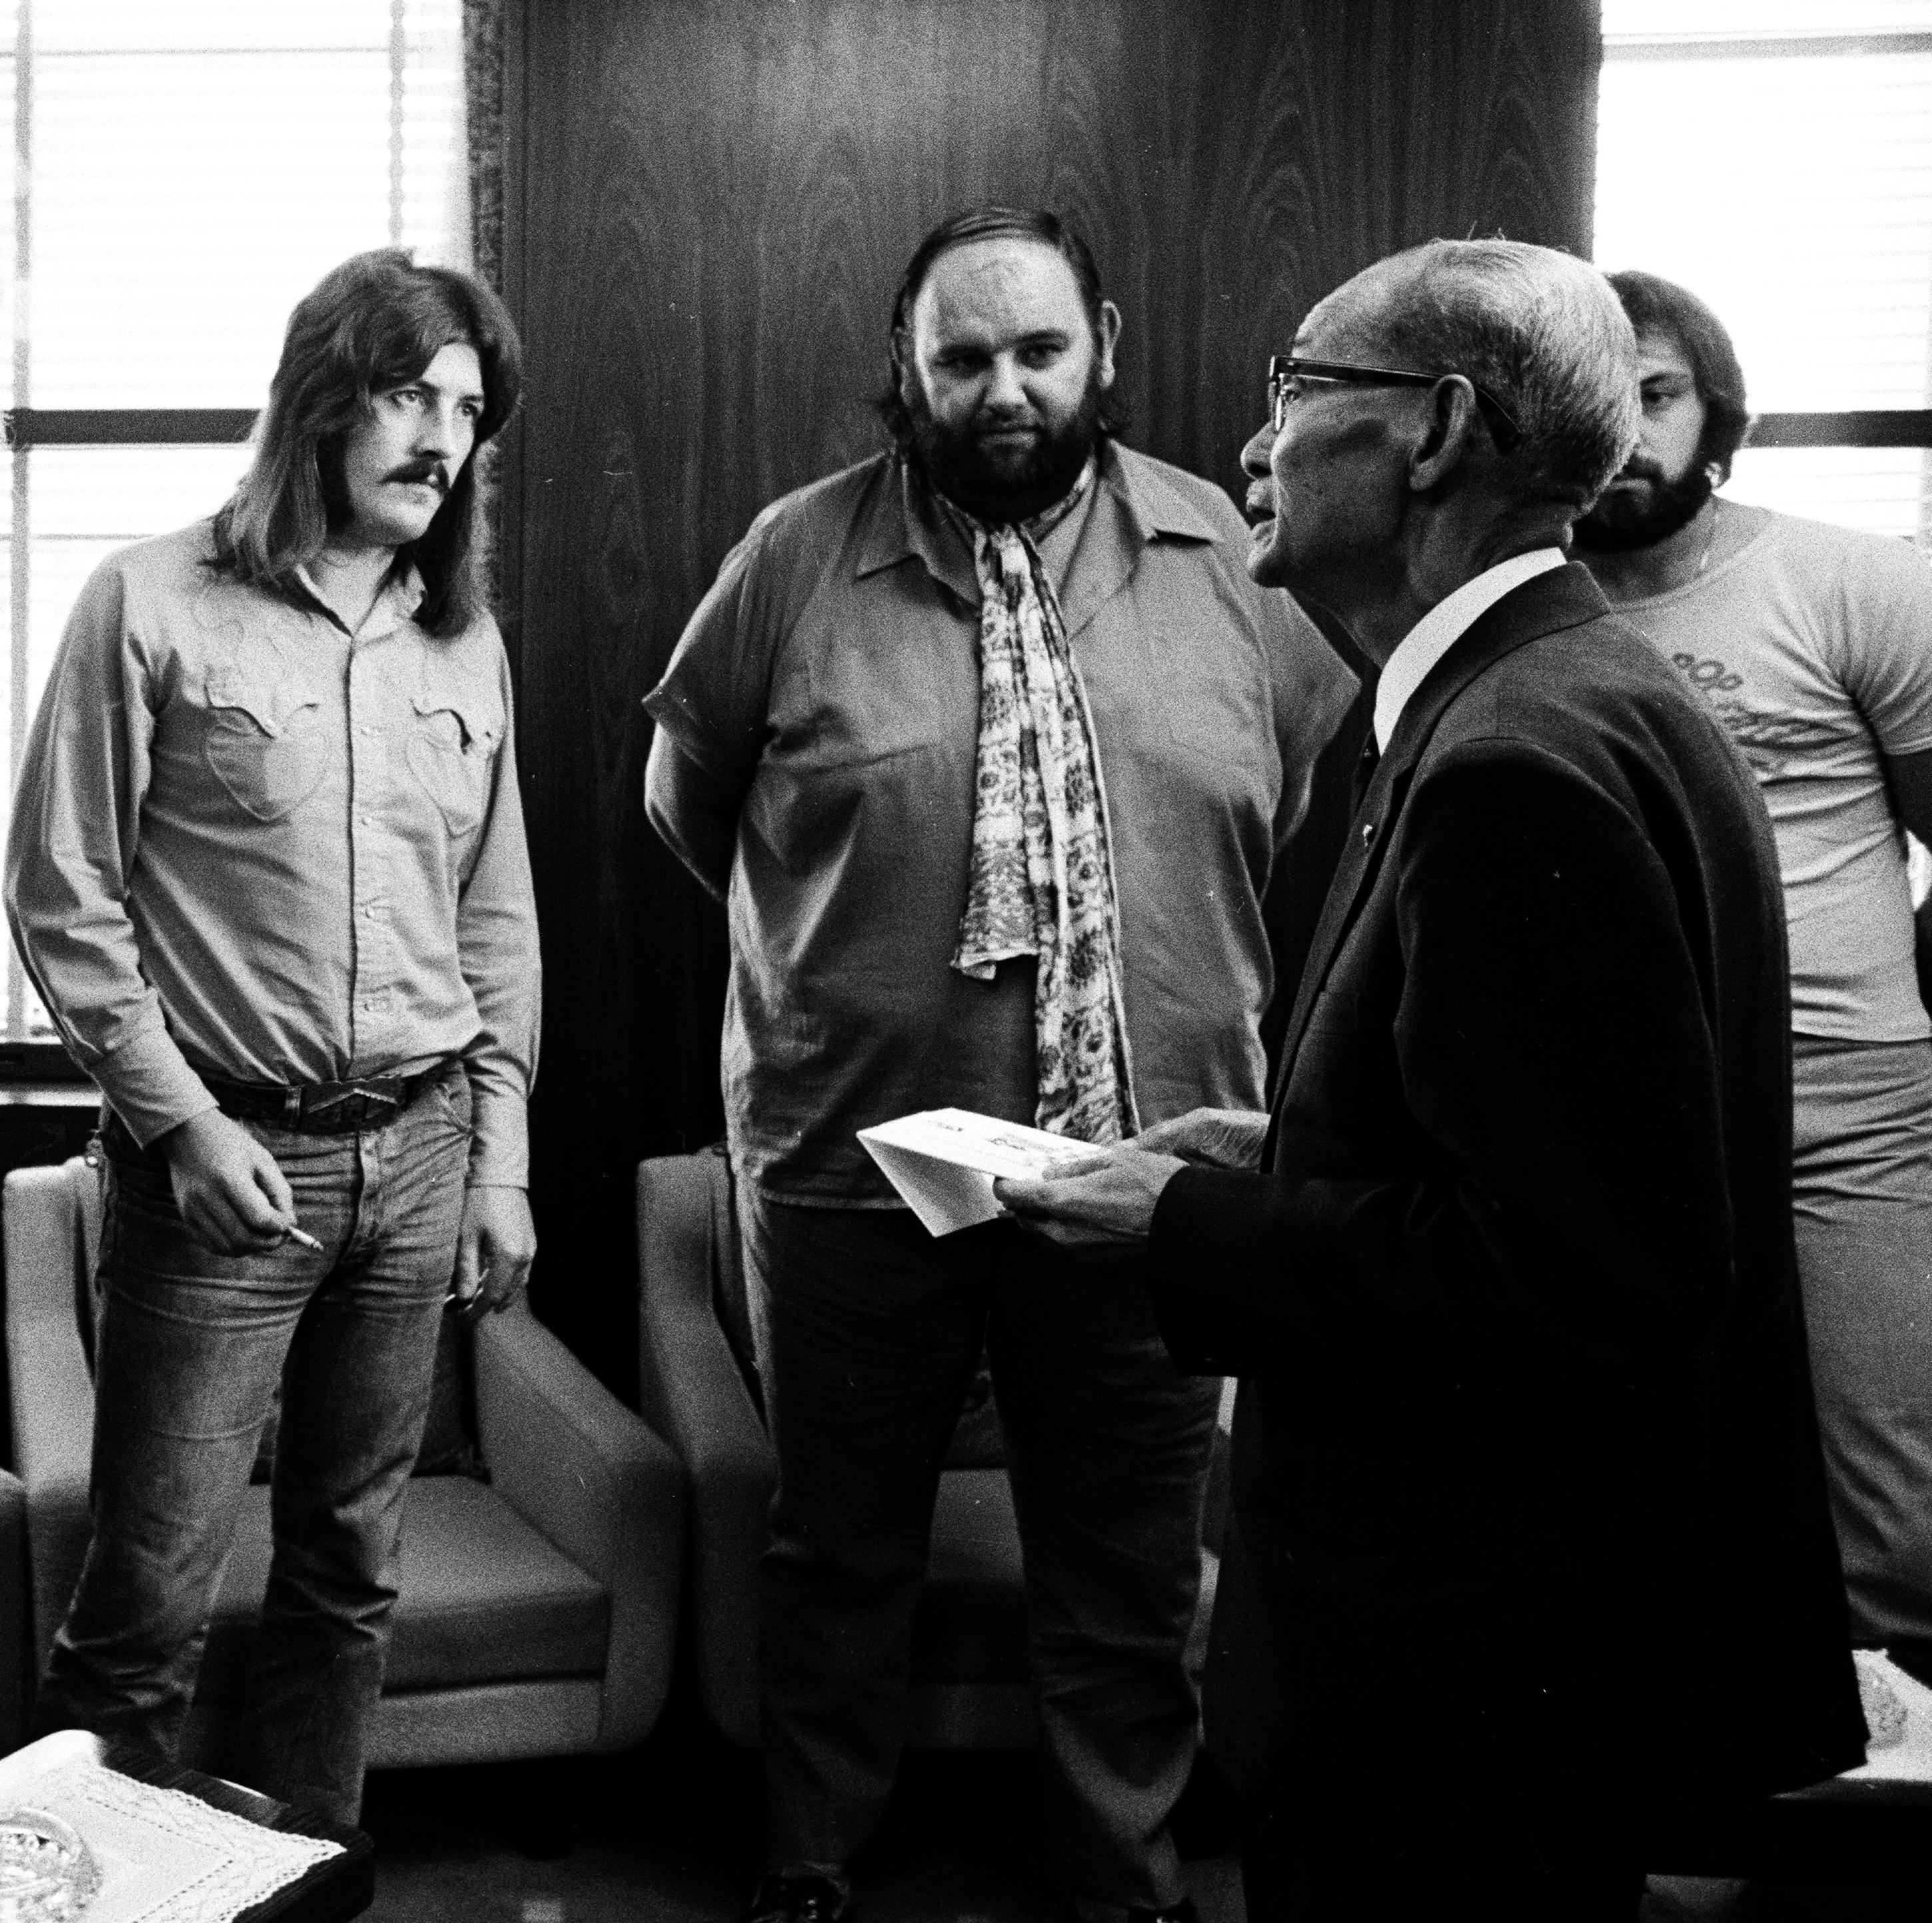 Led Zeppelin drummer John Bonham (left) stands next to the band's manager, Peter Grant, while meeting the mayor of Hiroshima, Japan, in 1971.